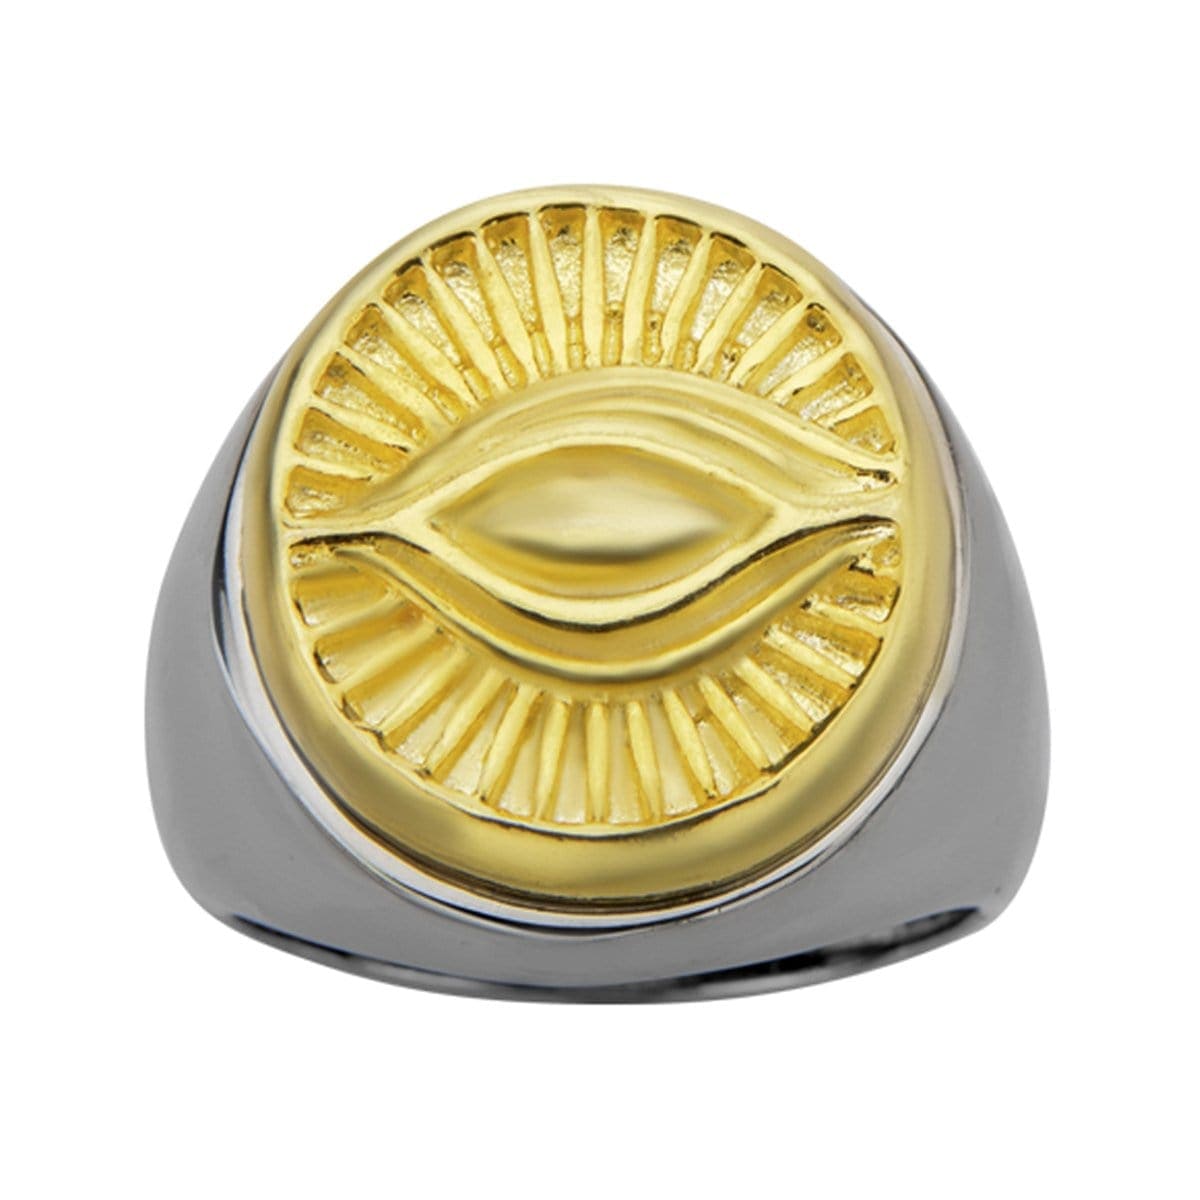 INOX JEWELRY Rings Antique Golden Tone and Silver Tone Stainless Steel All Seeing Eye of God Ring